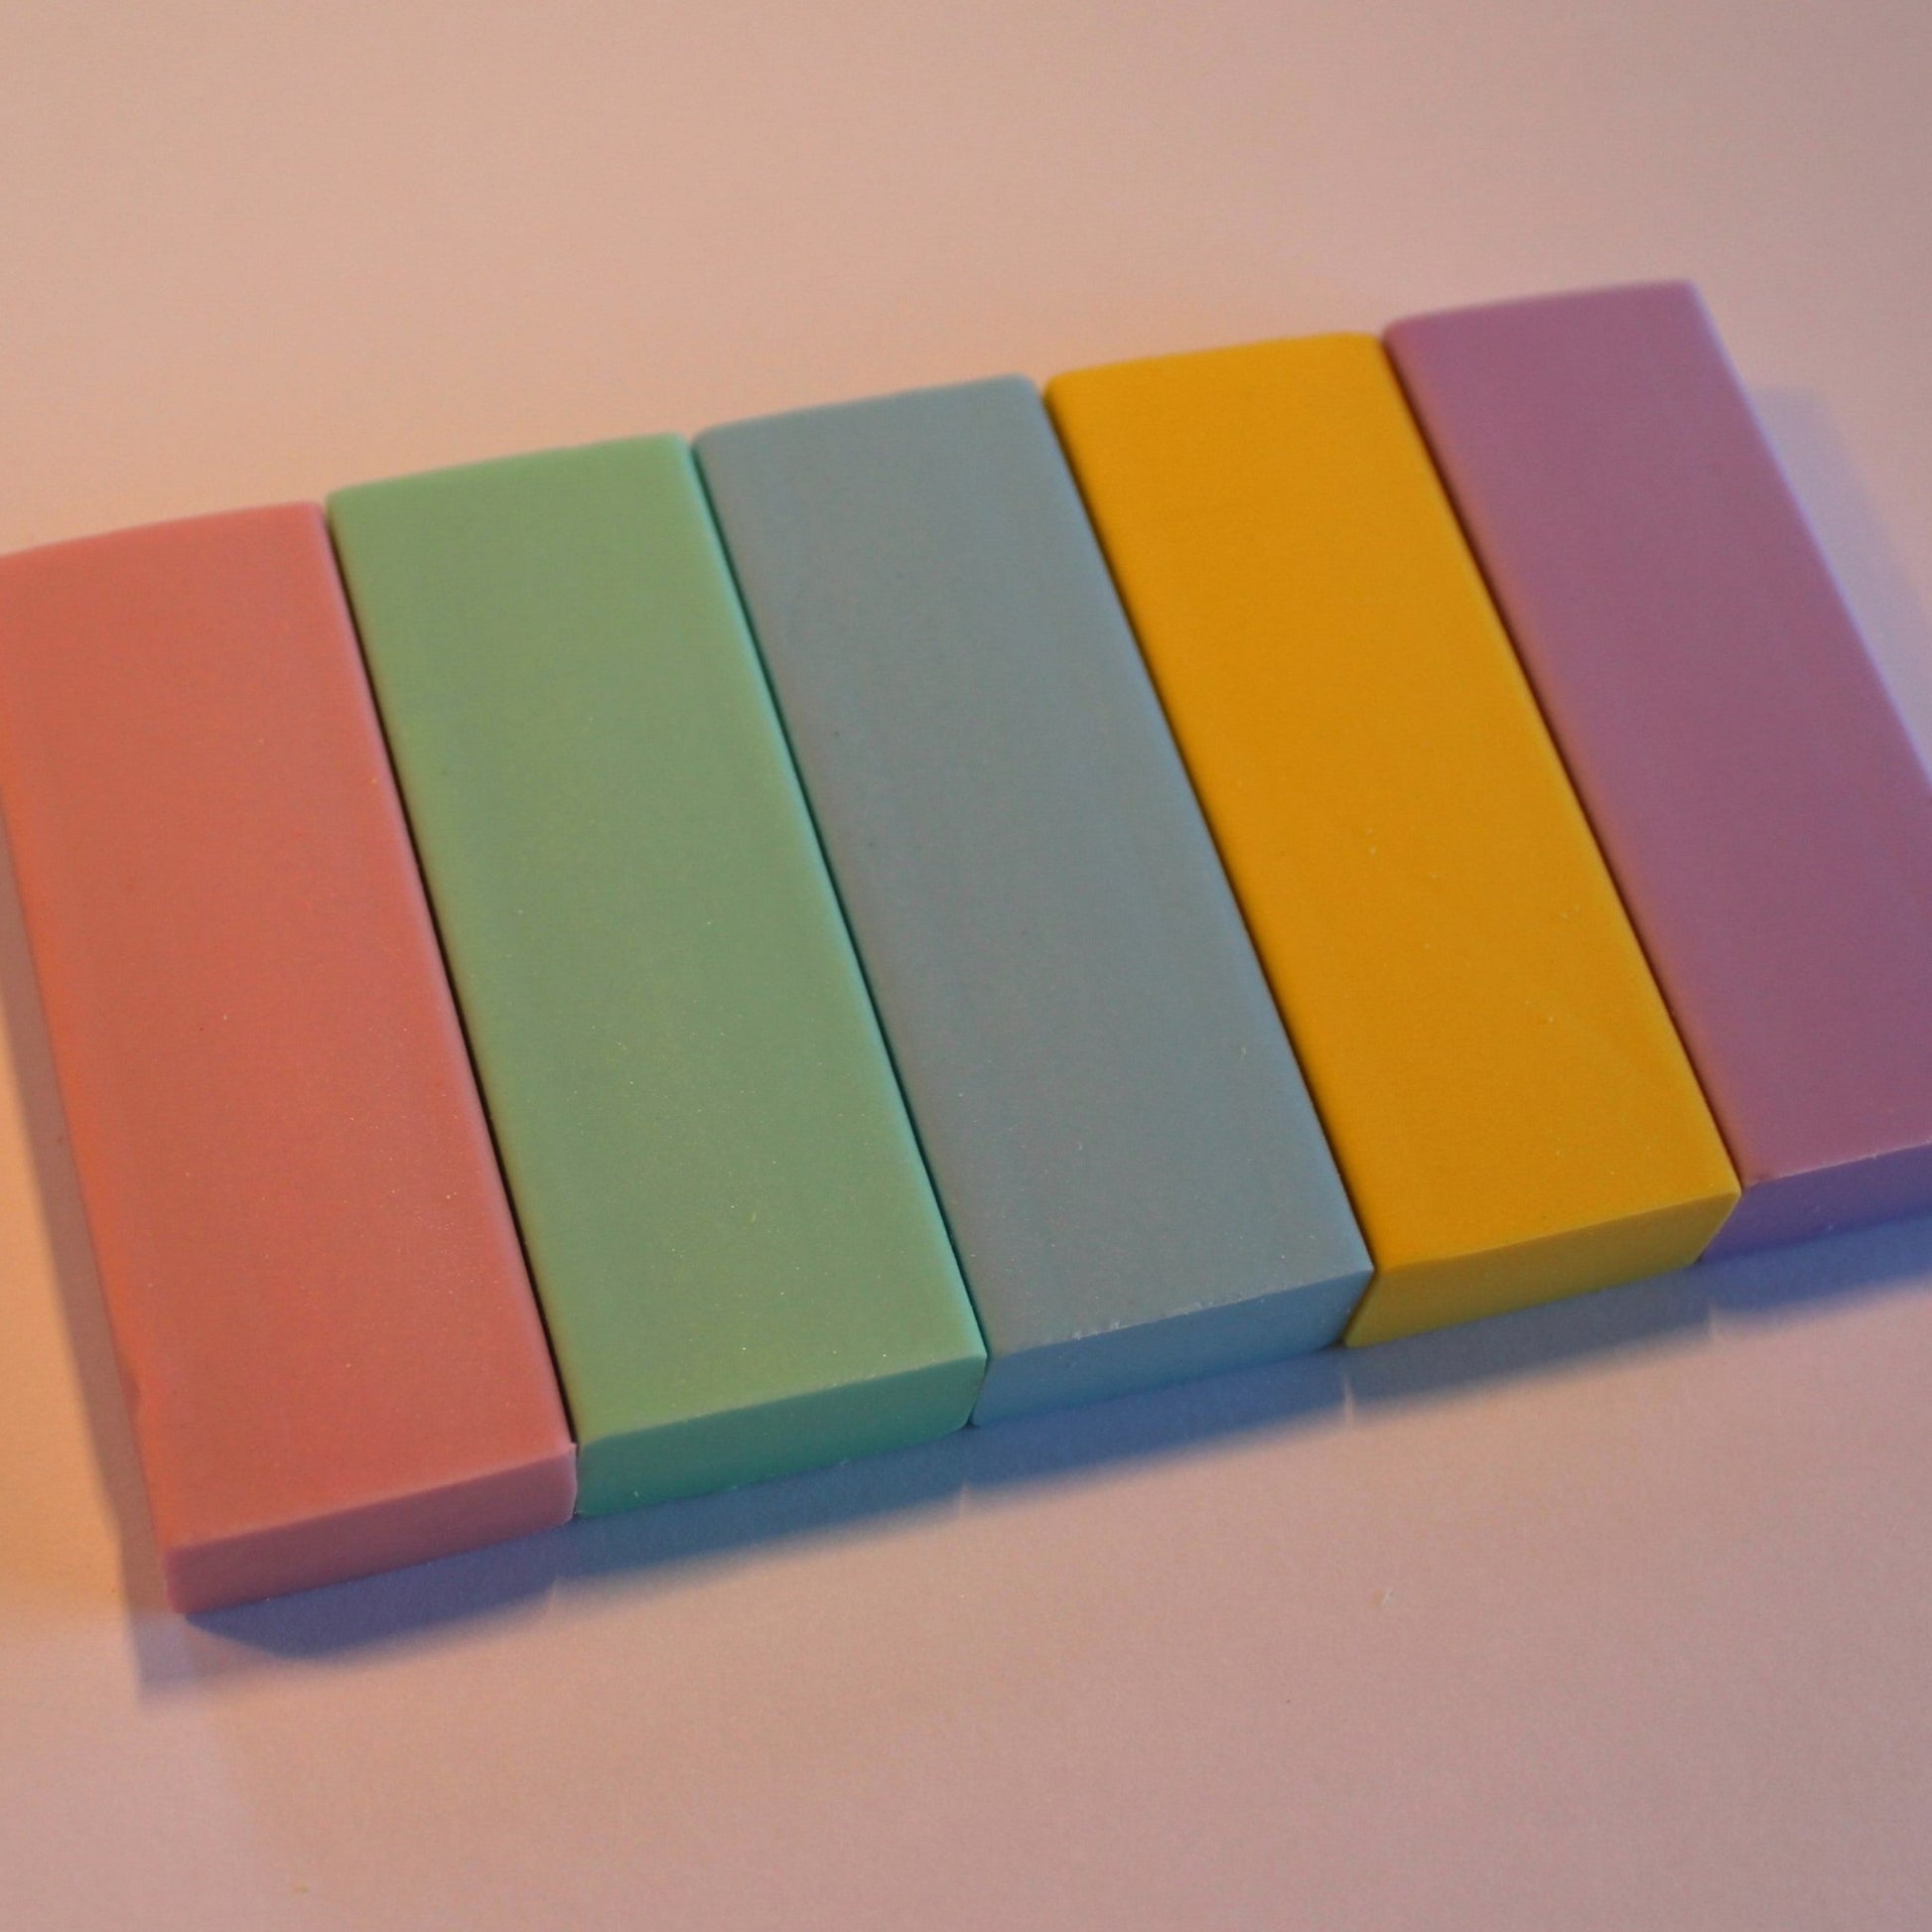 A pack of pastel green, blue, pink yellow and purple rubbers.